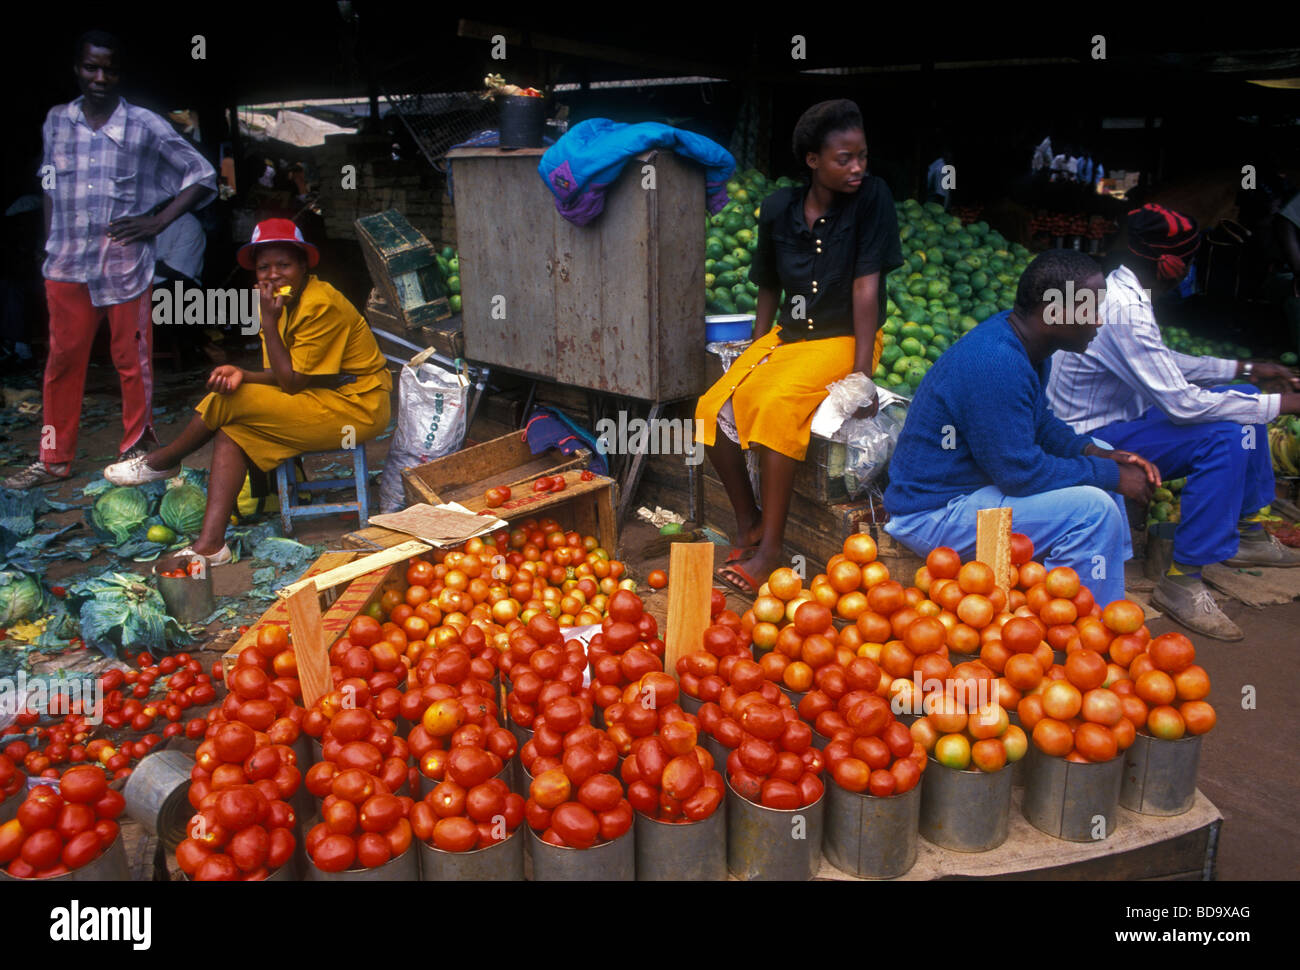 vendor, vendors, seller, selling, fresh tomatoes, tomatoes, fruit and vegetable market, open-air market, city of Harare, Harare Province, Zimbabwe Stock Photo